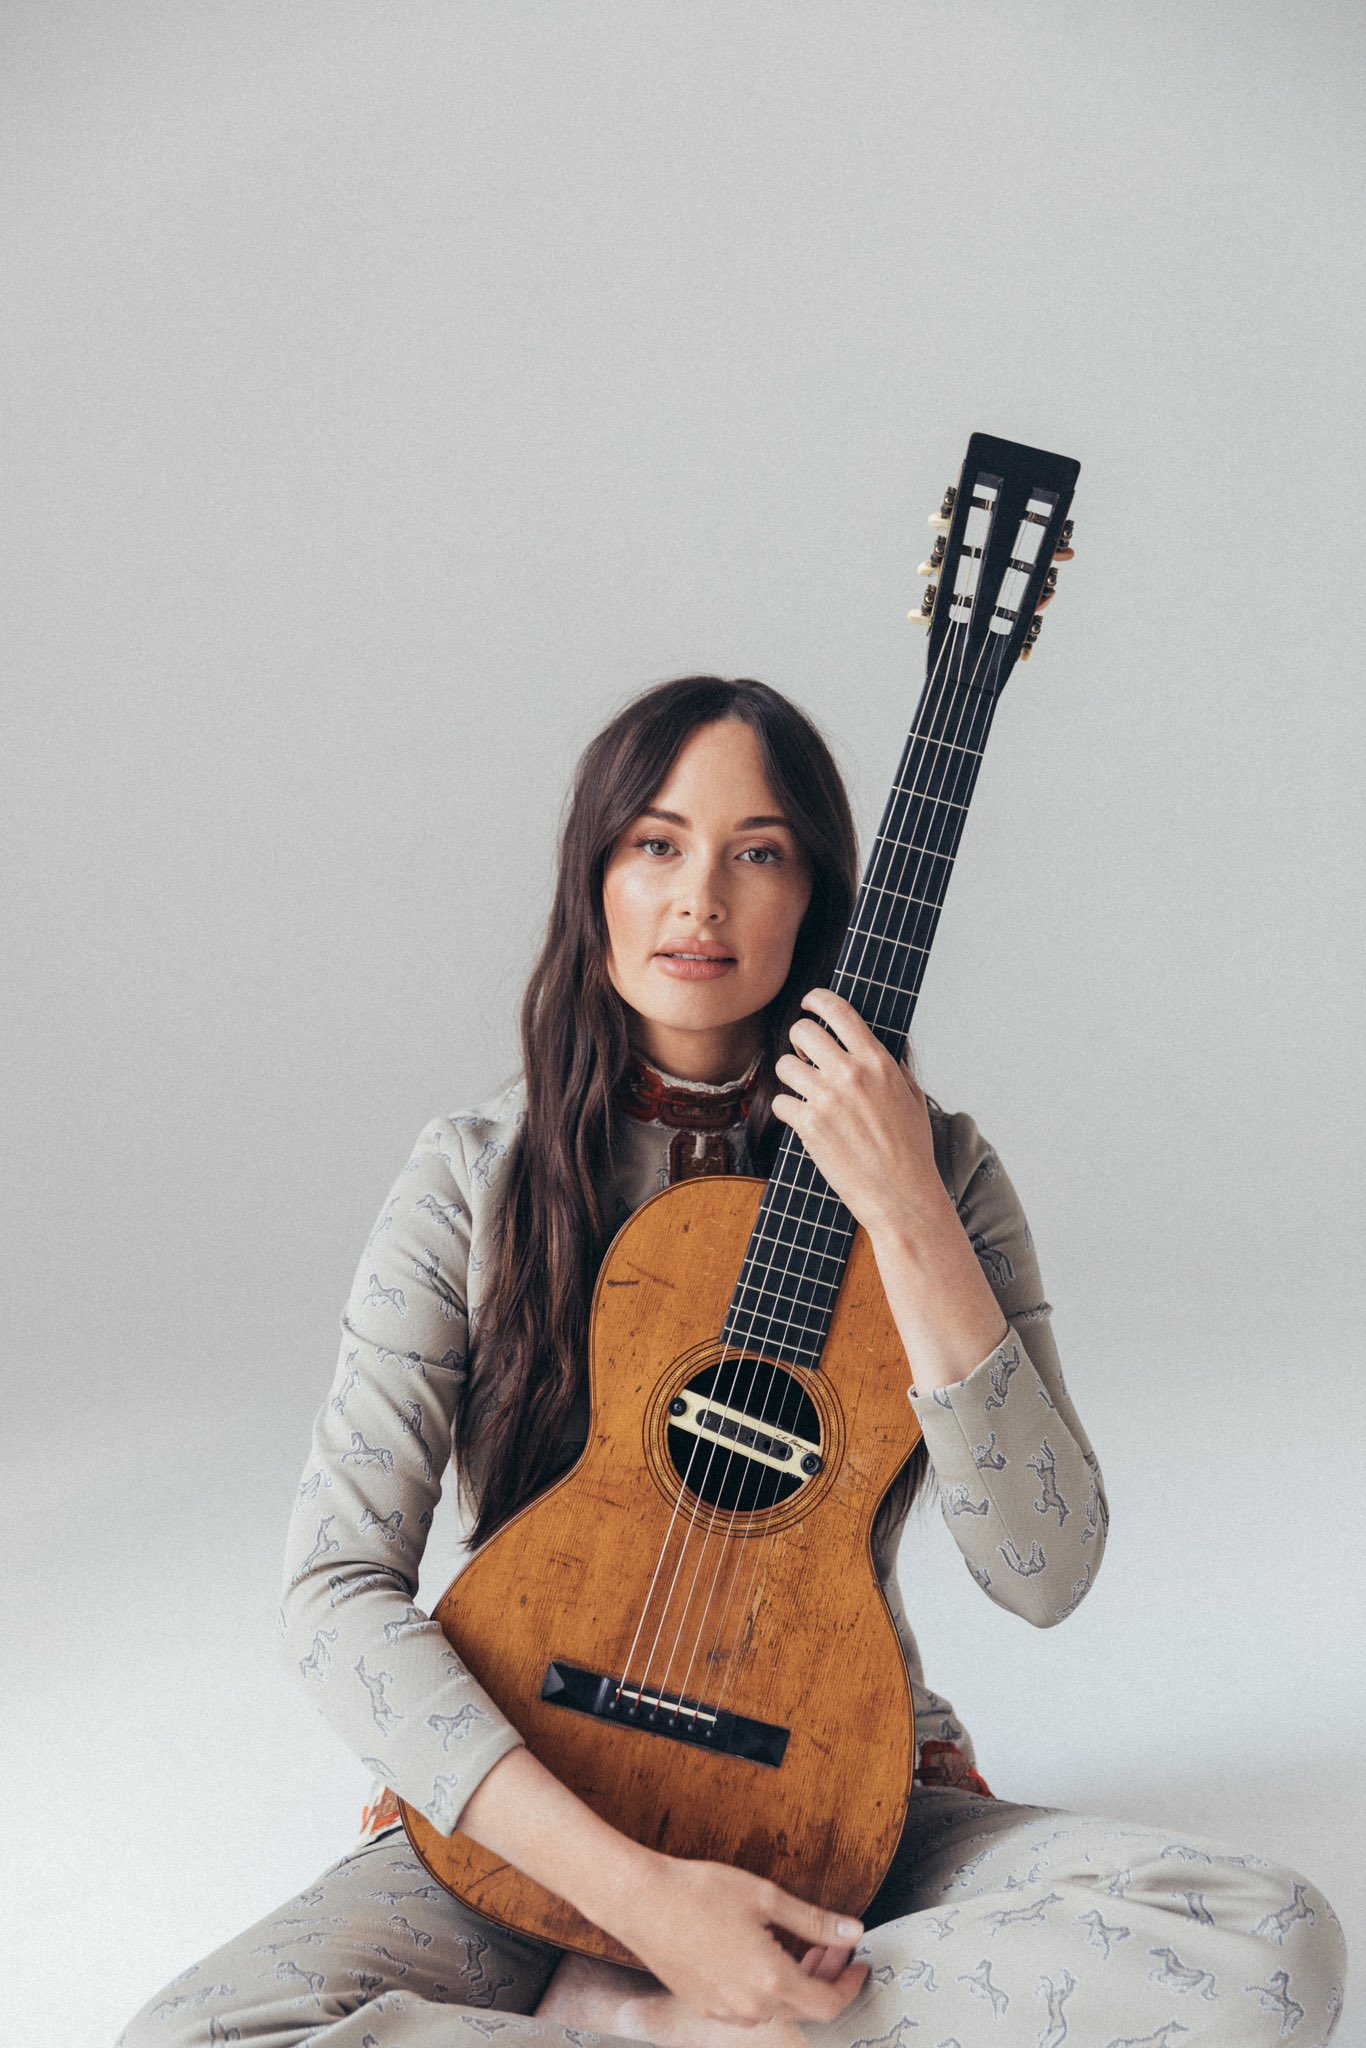 New Music Friday: Kacey Musgraves Drops First Single “Deeper Well” Ahead of Fifth Studio Album